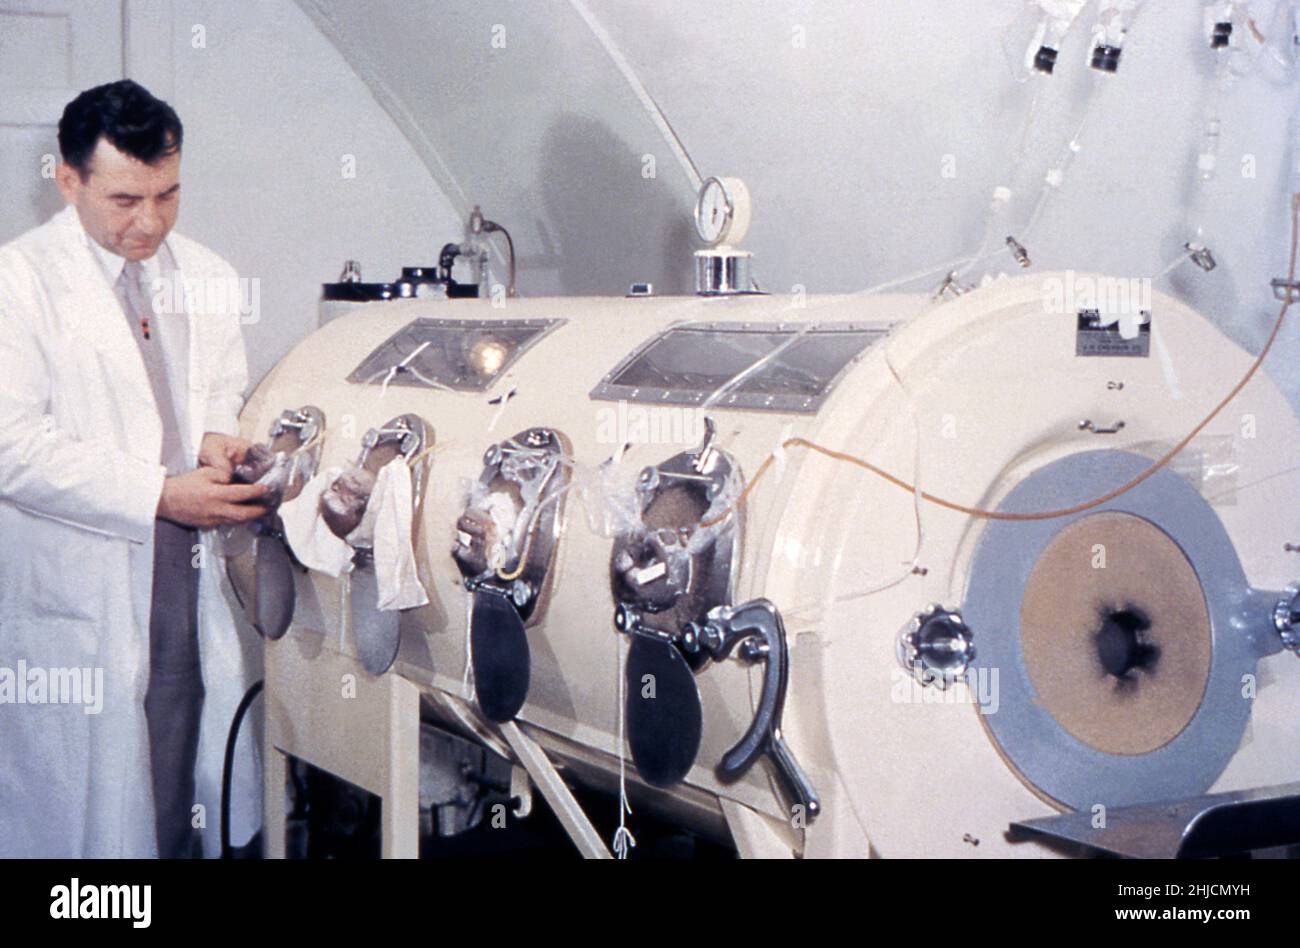 Technician calibrating an iron lung machine. These machines were used to keep polio patients alive, enabling them to breathe by creating a negatively-pressurized environment around their bodies after having been sealed inside the machine, with only their head exterior to the confines of the apparatus. Poliovirus is a member of the enterovirus subgroup, family Picornaviridae. Enteroviruses are transient inhabitants of the gastrointestinal tract, and are stable at acid pH. Picornaviruses are small, ether-insensitive viruses with an RNA genome. Stock Photo